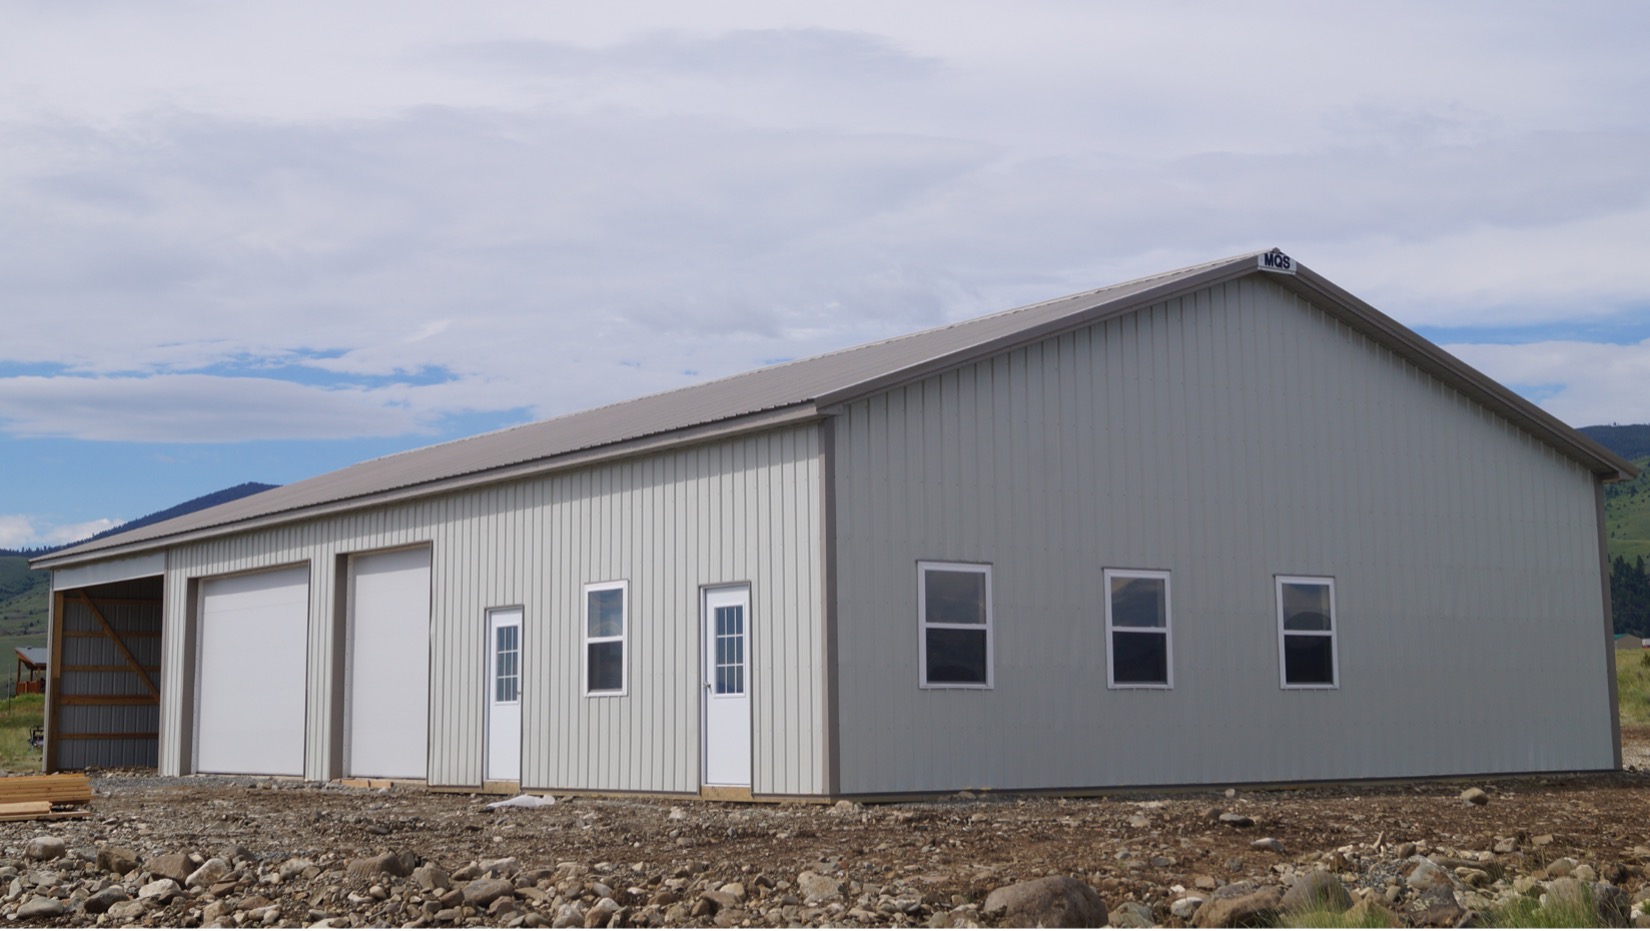 7 Reasons Metal Buildings in Montana are Highly Weather Resistant